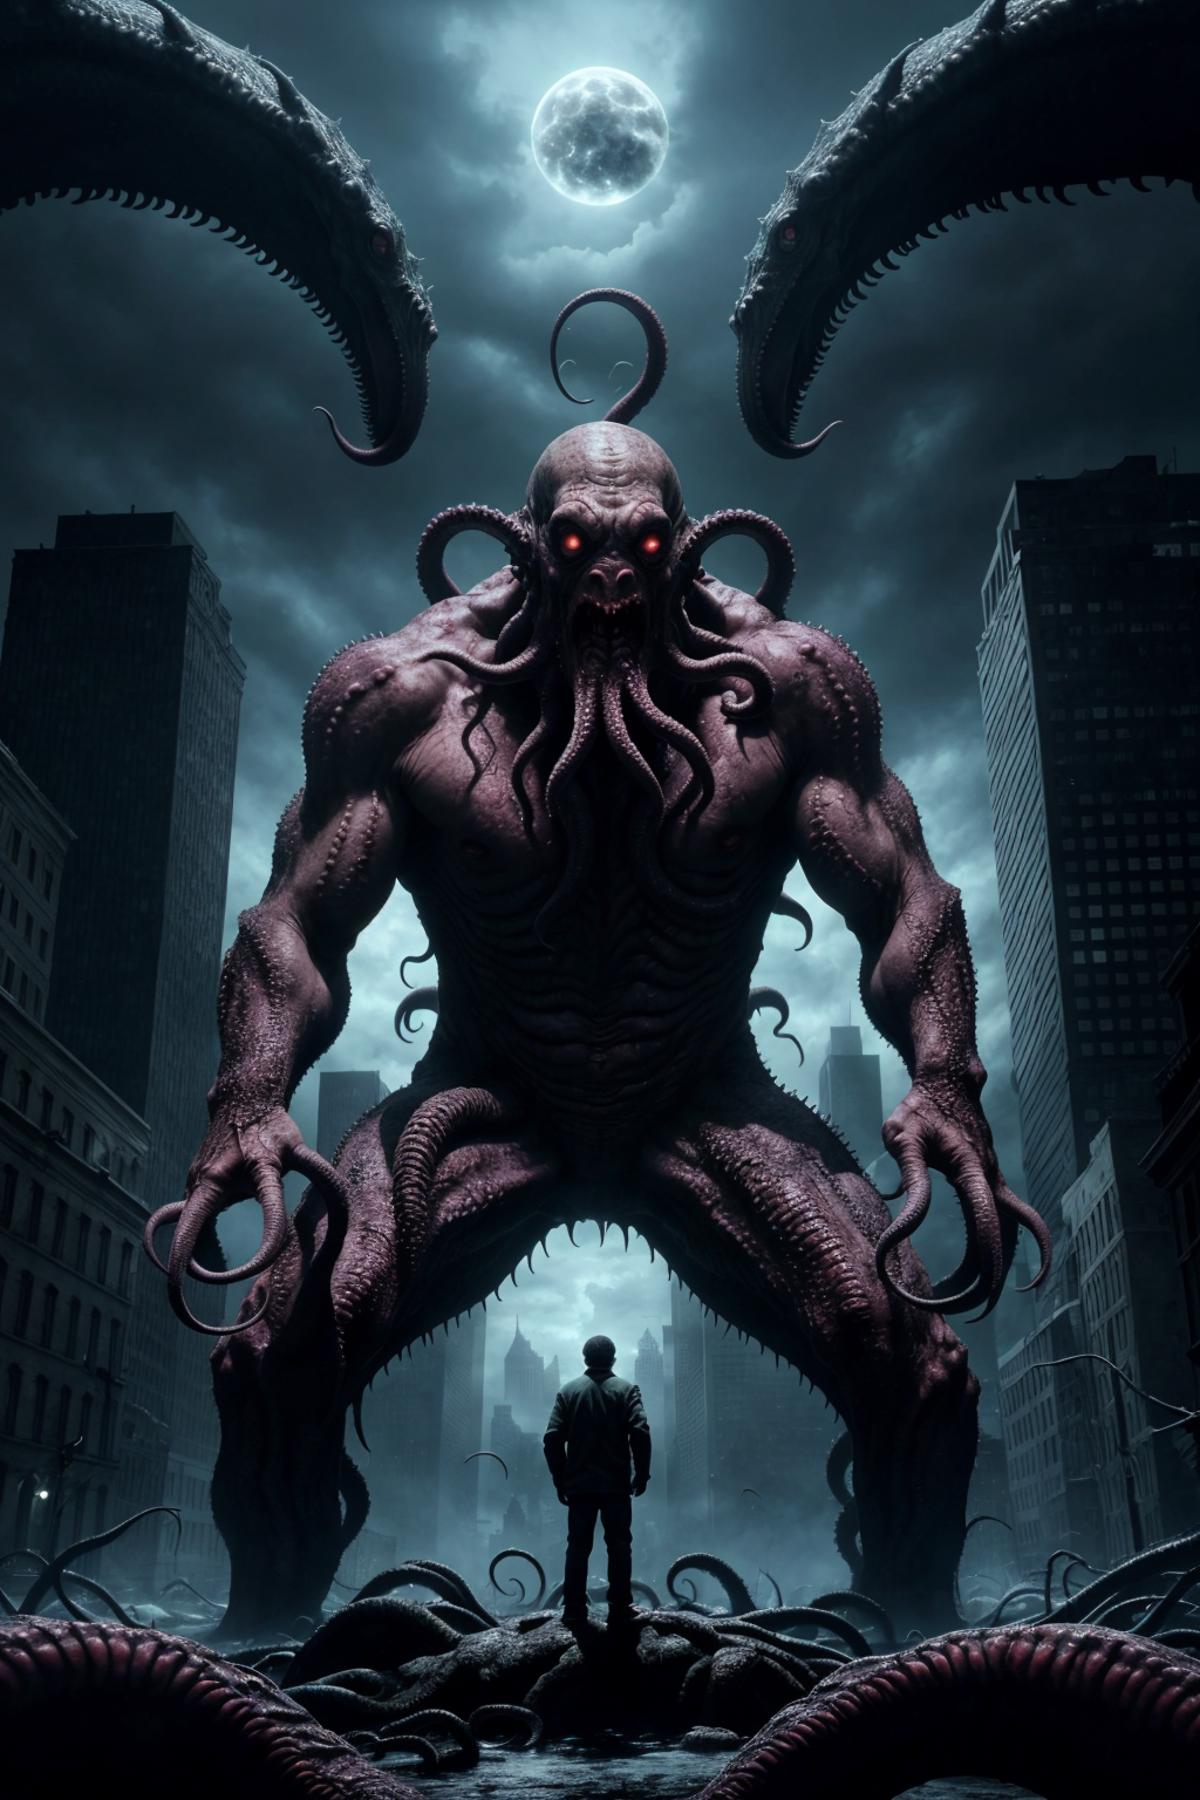 A person standing in front of a giant purple monster with tentacles and red eyes in a dark cityscape.